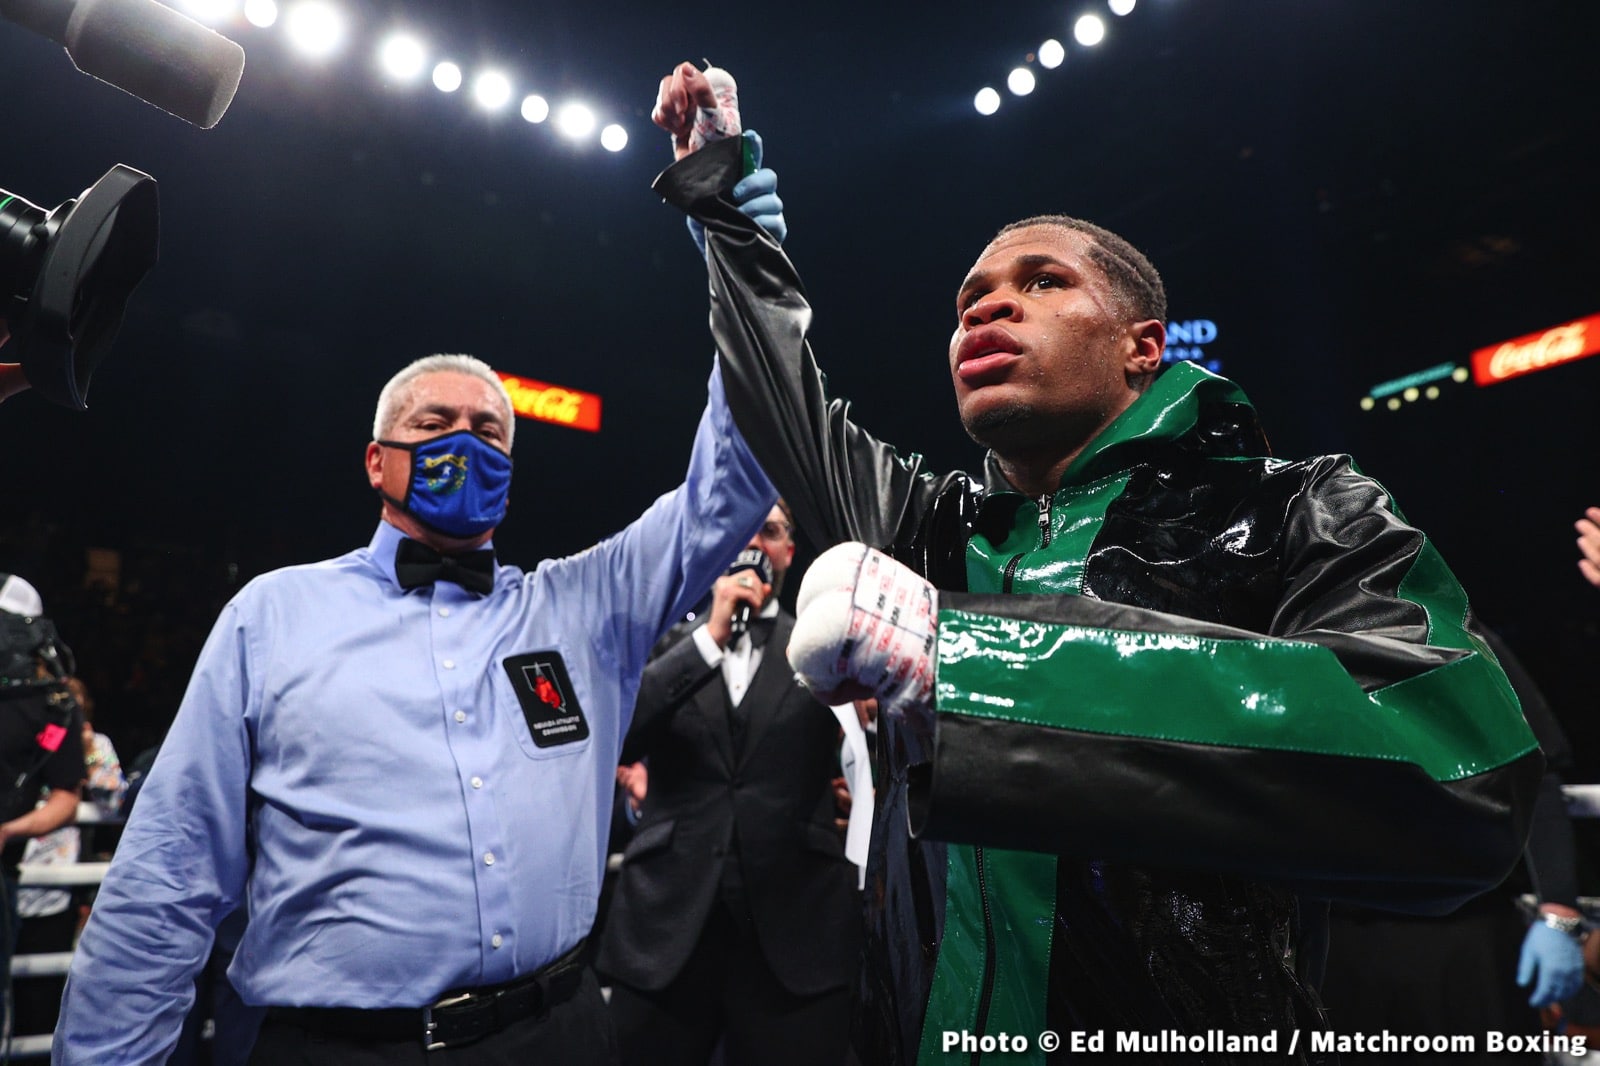 Image: George Kambosos would rather fight Devin Haney than Lomachenko says Eddie Hearn